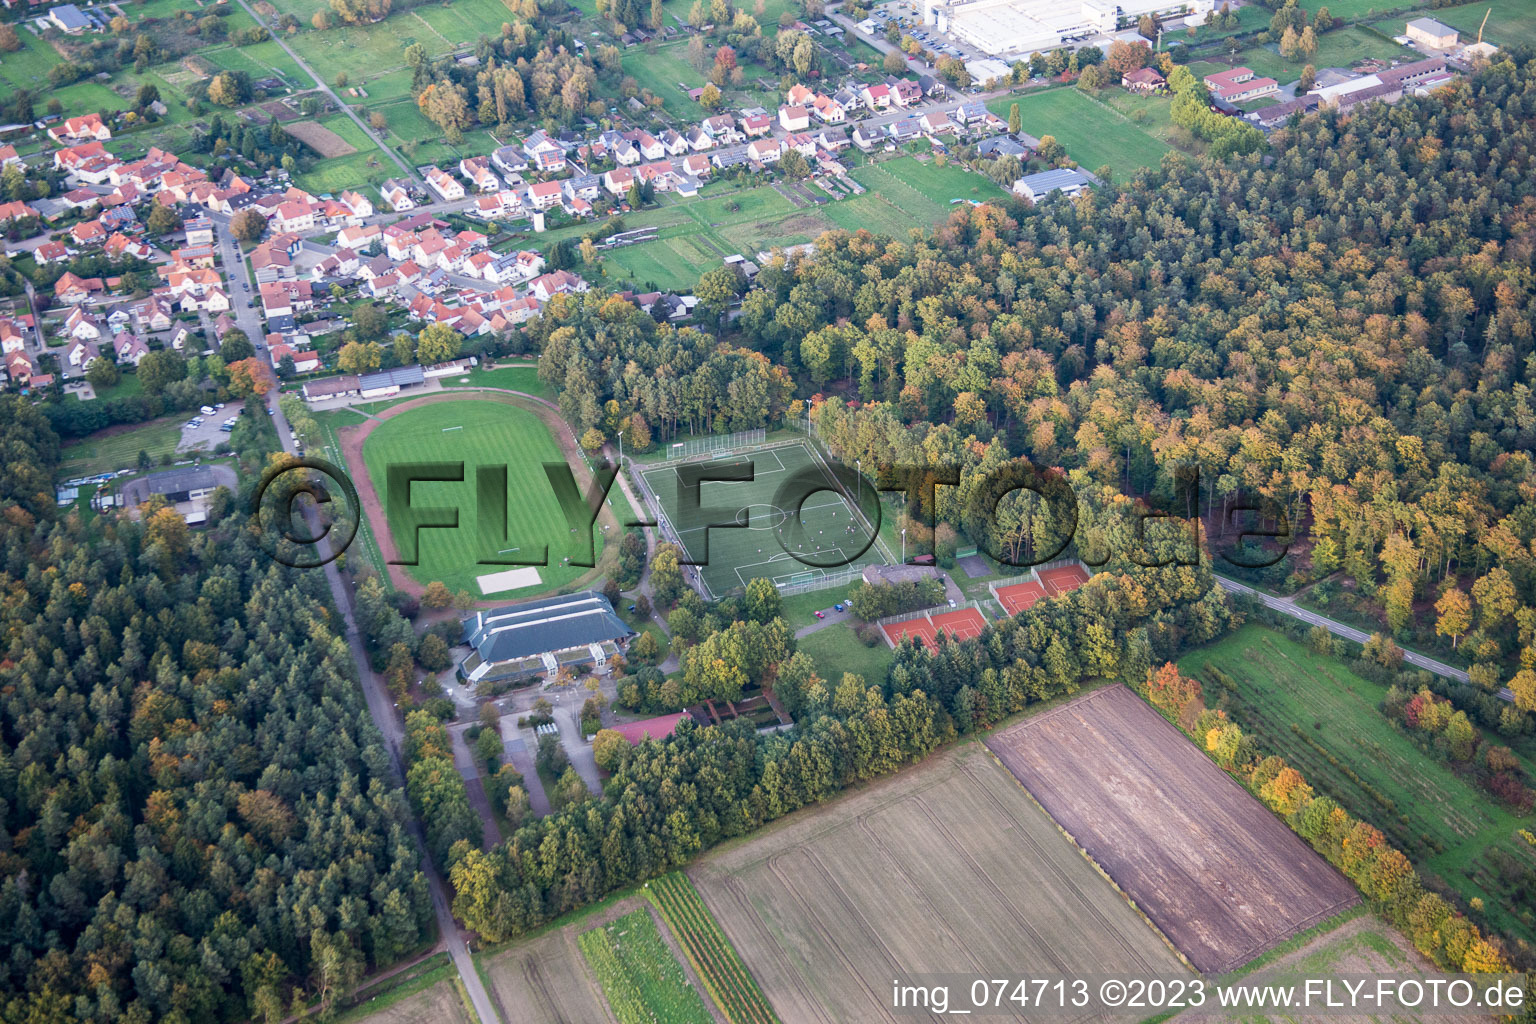 District Schaidt in Wörth am Rhein in the state Rhineland-Palatinate, Germany out of the air